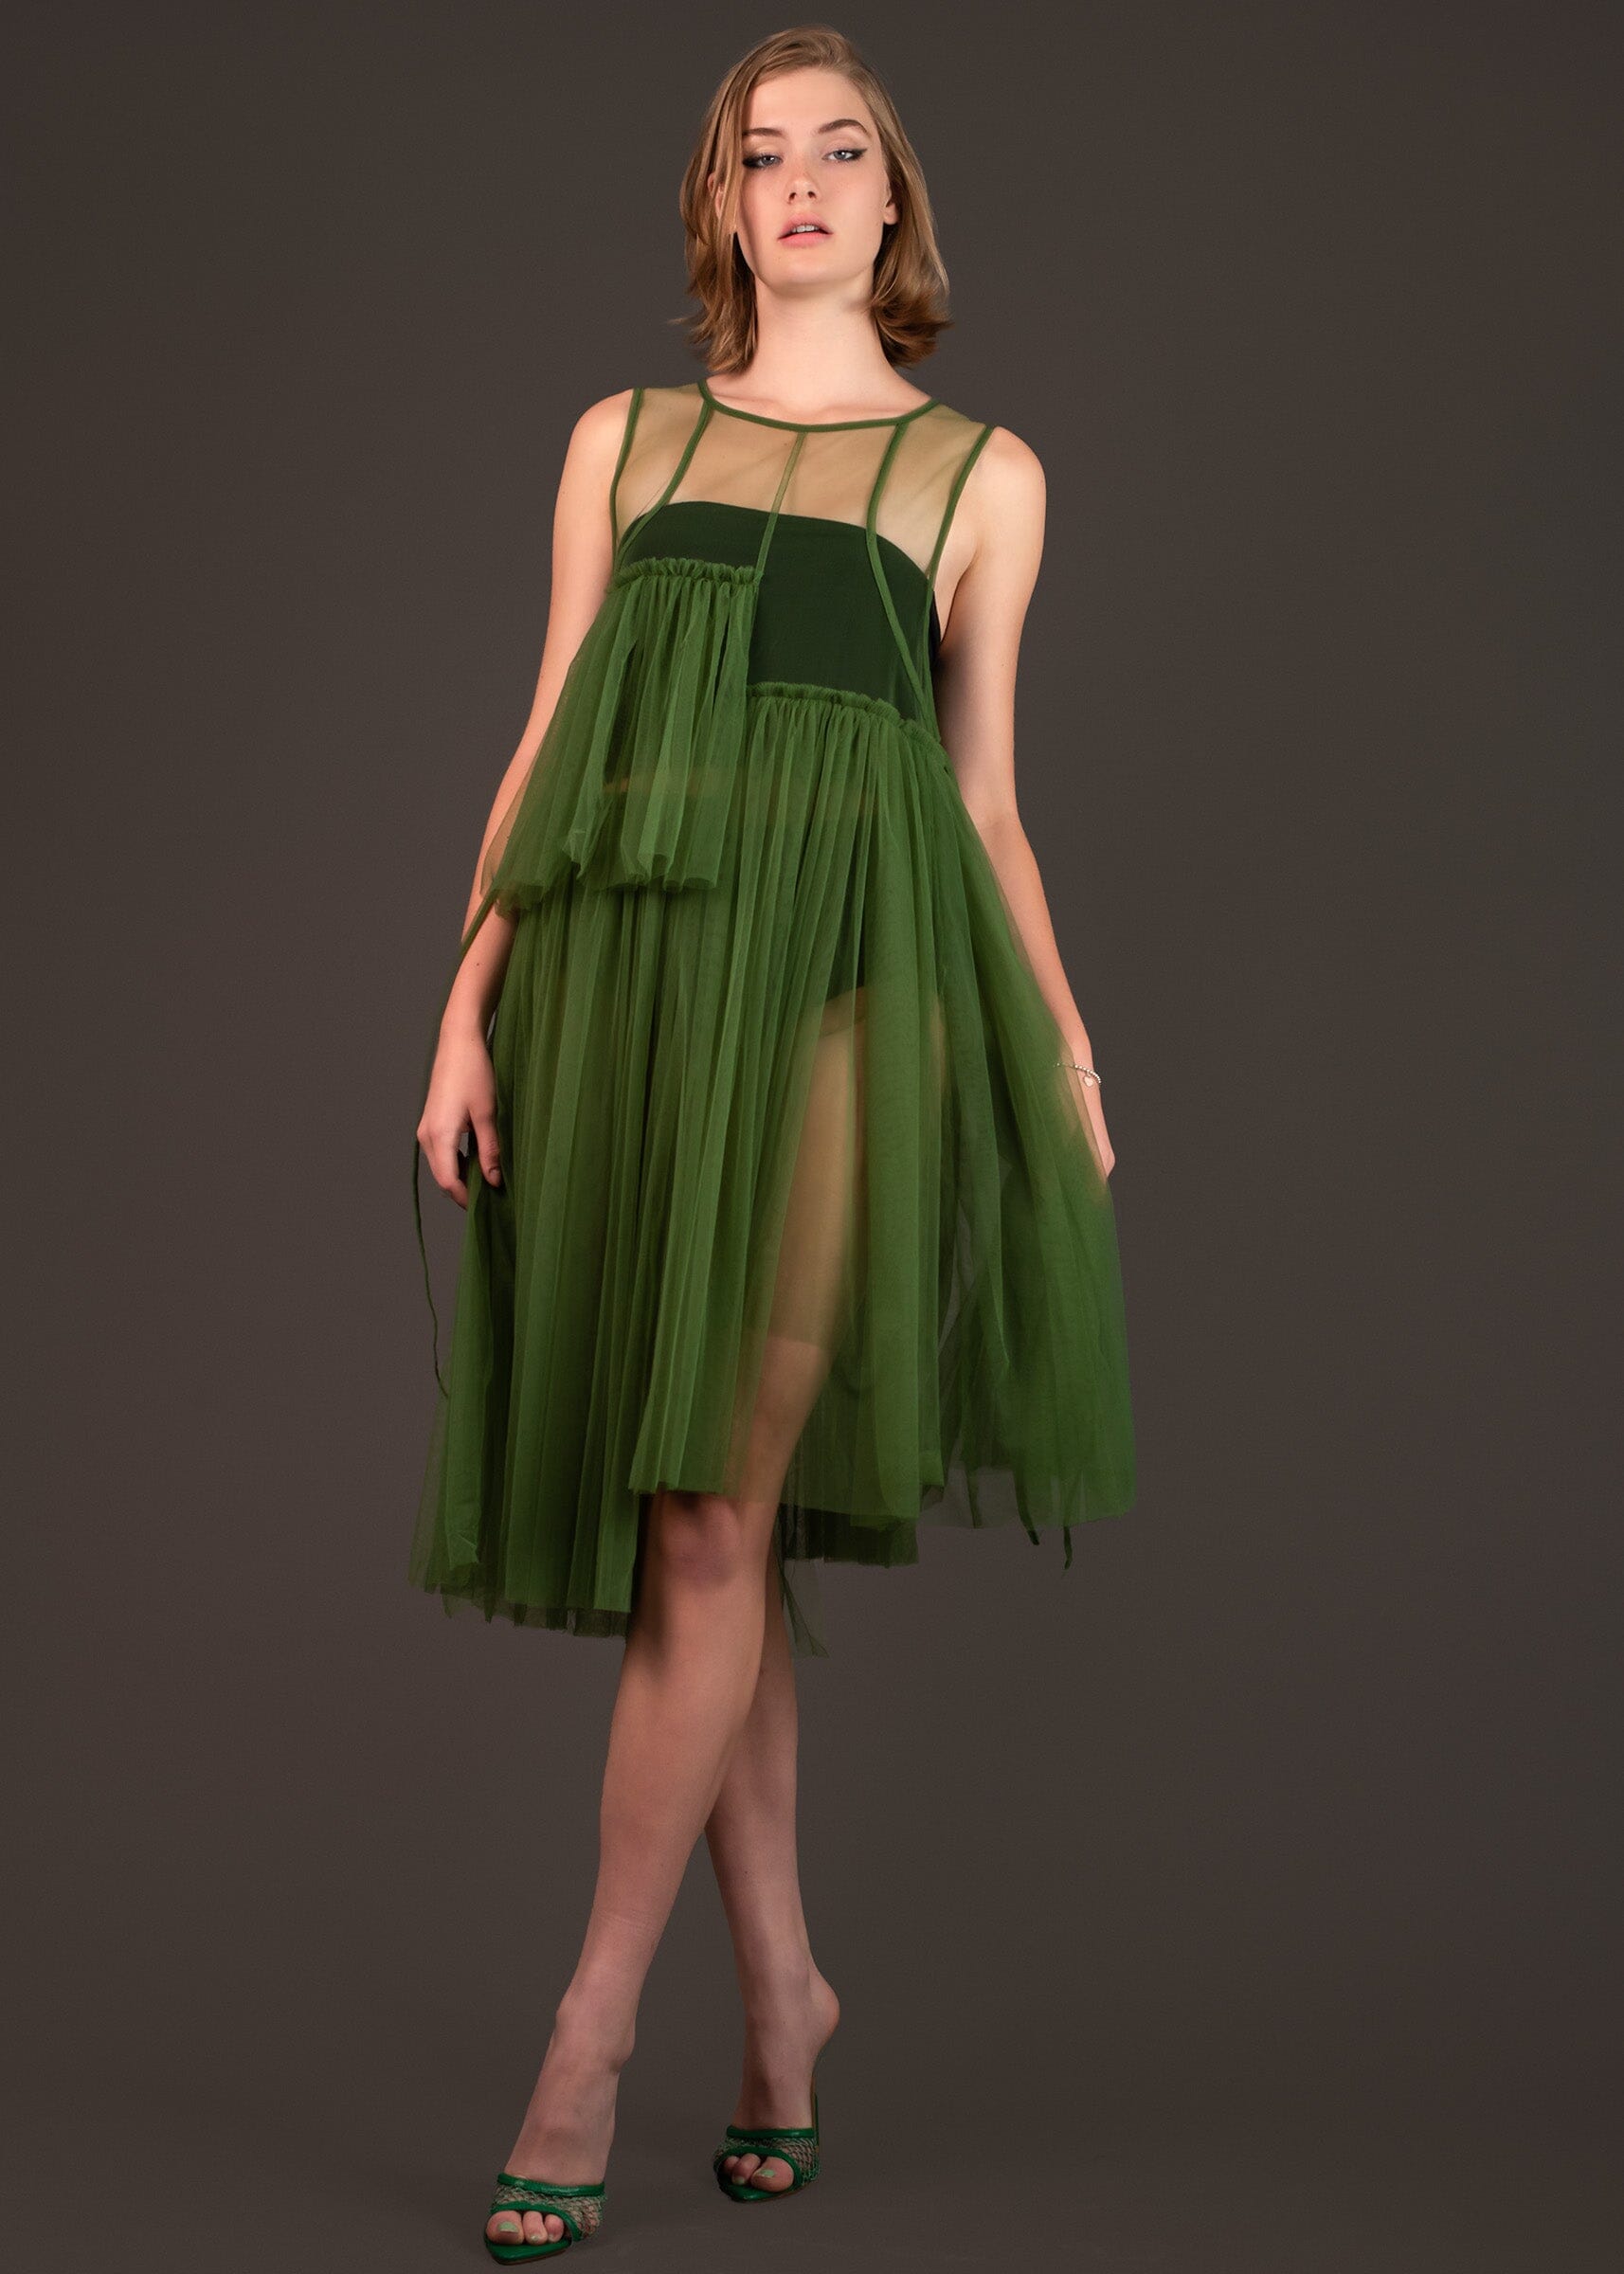 Layered Tulle Tank Overlay Dresses Kate Hewko 